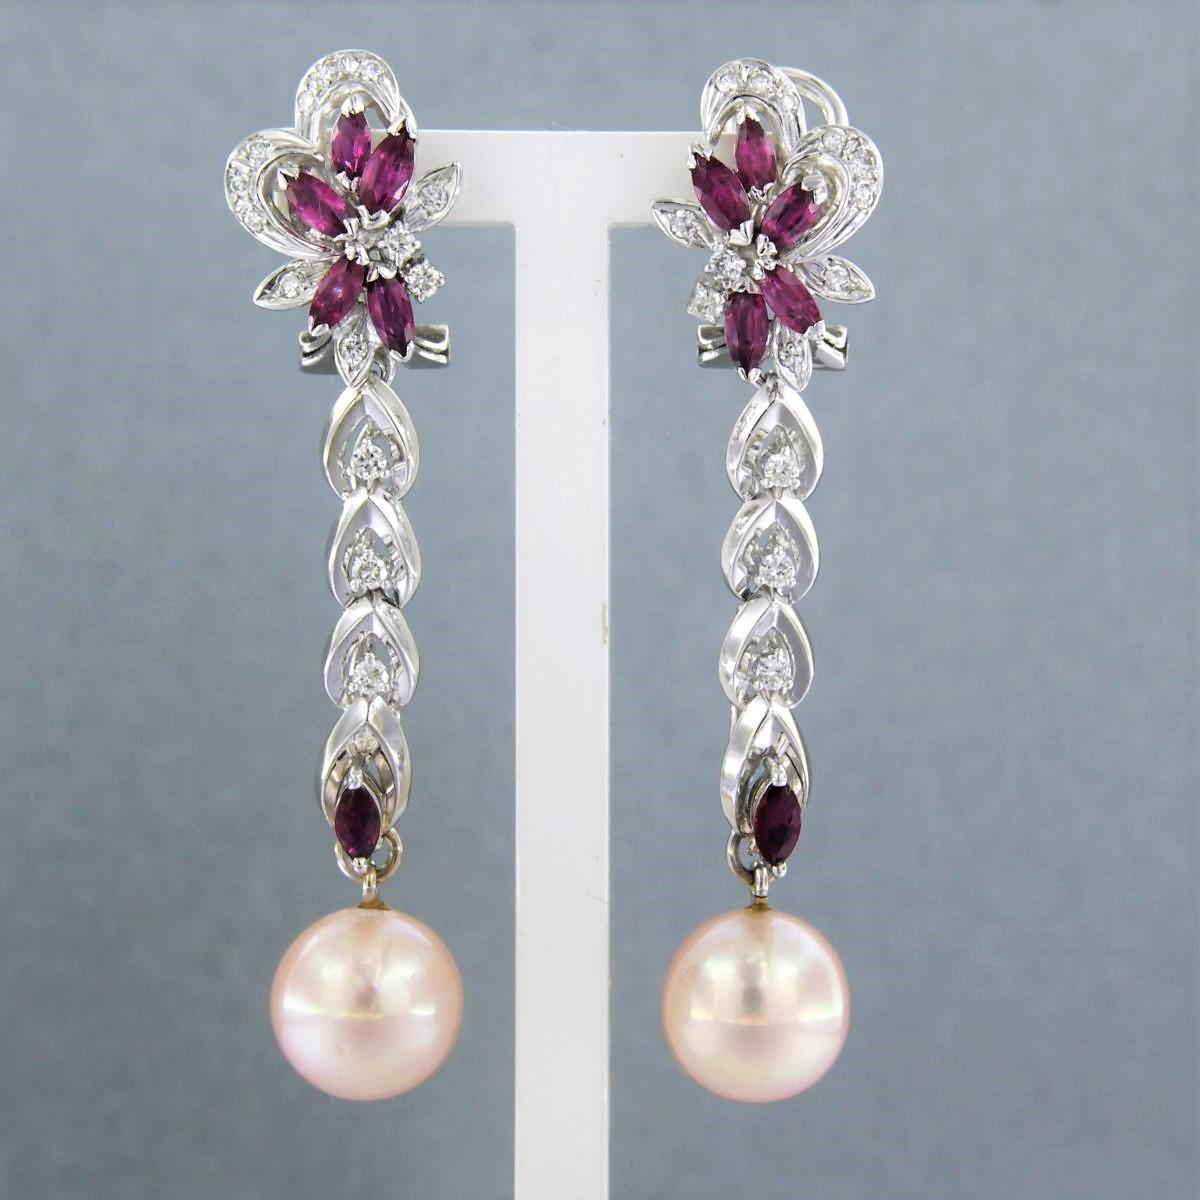 Earrings set with Pearl, Ruby and diamonds 14k white gold For Sale 3